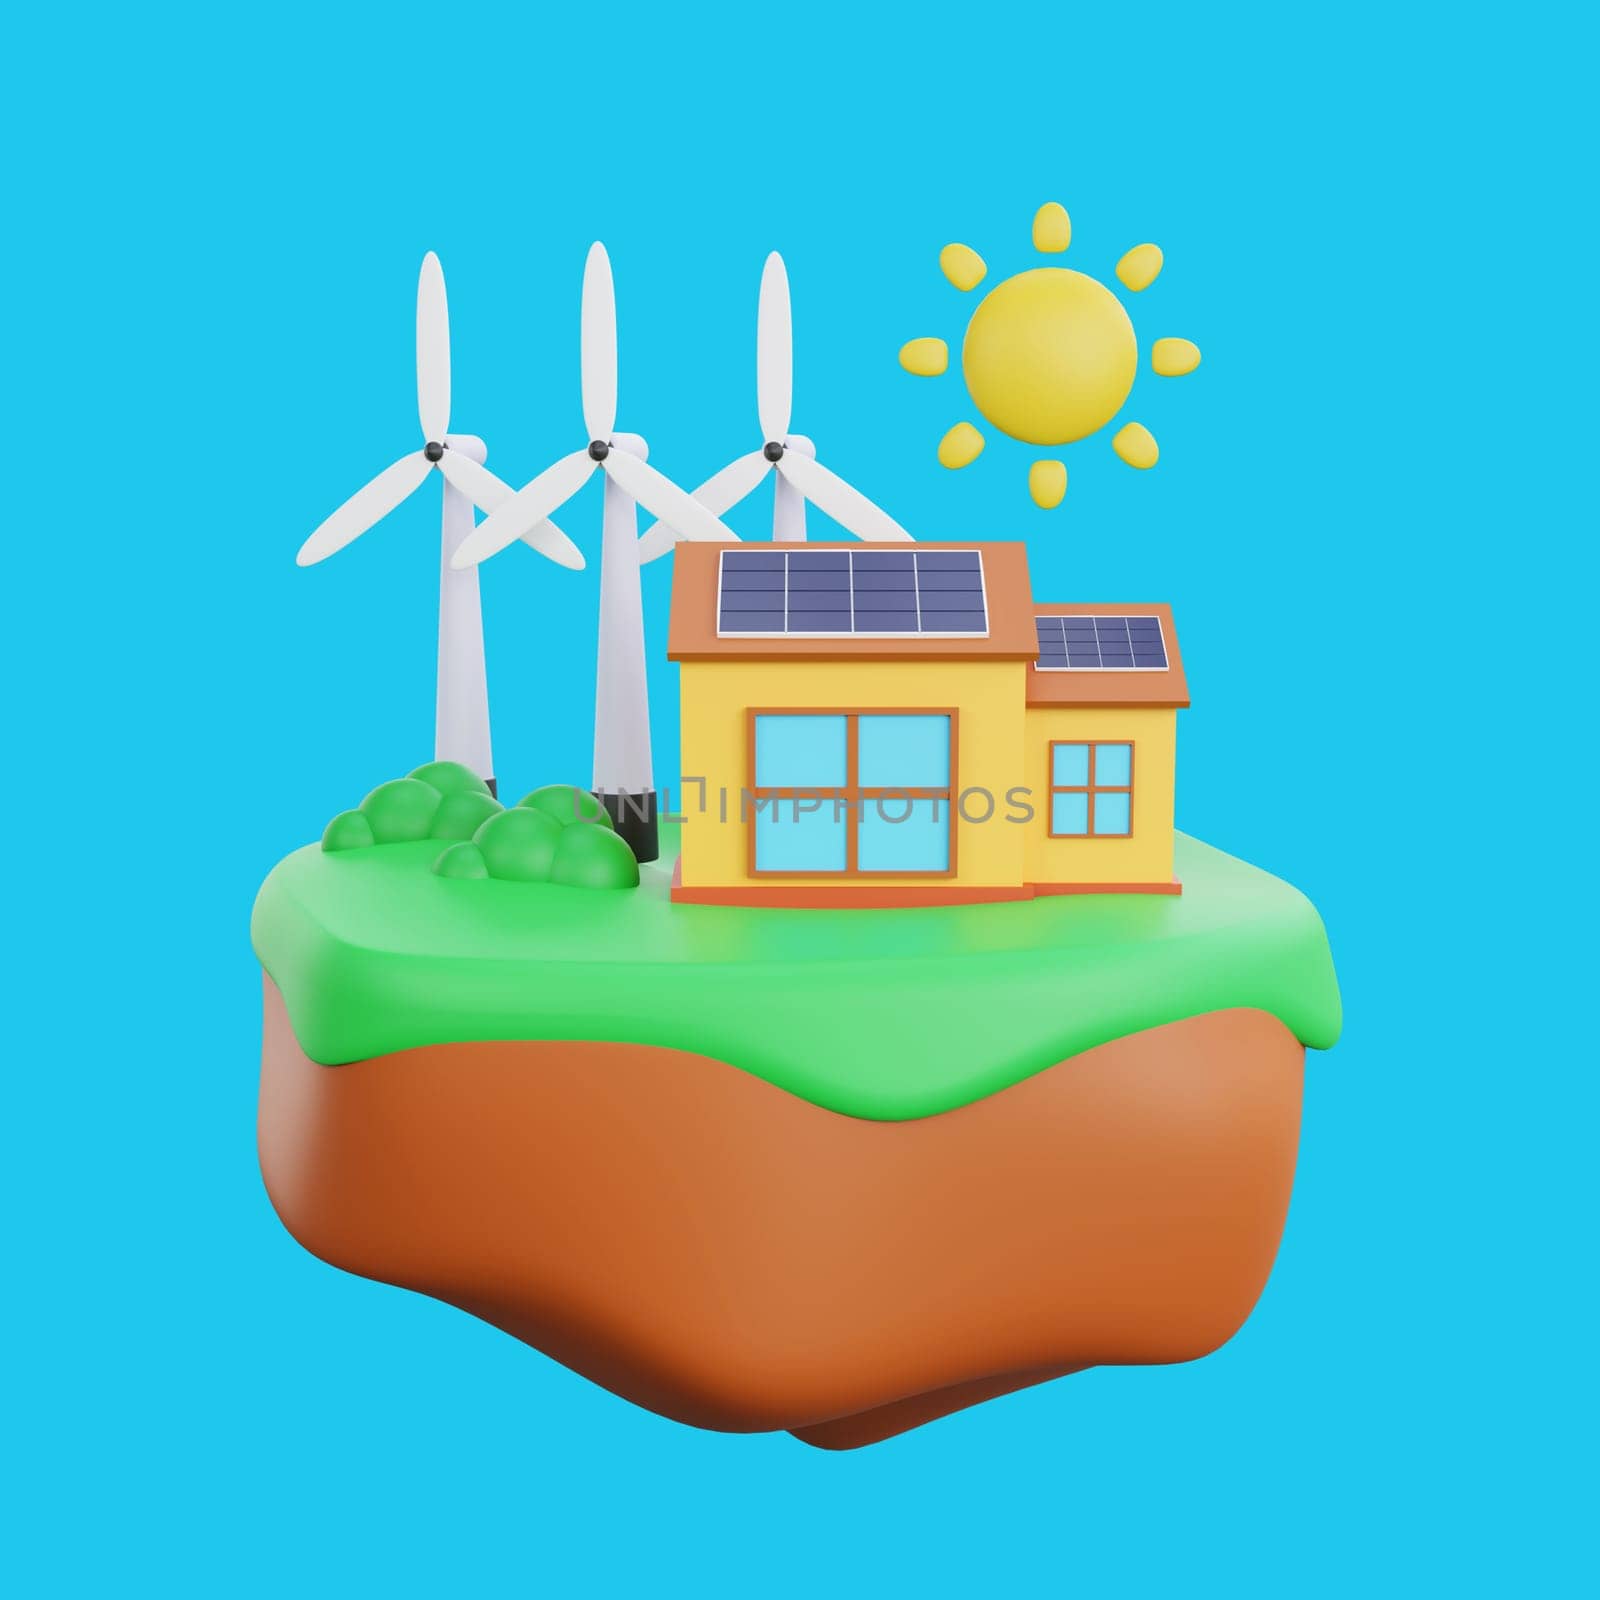 3d rendering of a wind turbine and solar panels ecology concept  by Rahmat_Djayusman